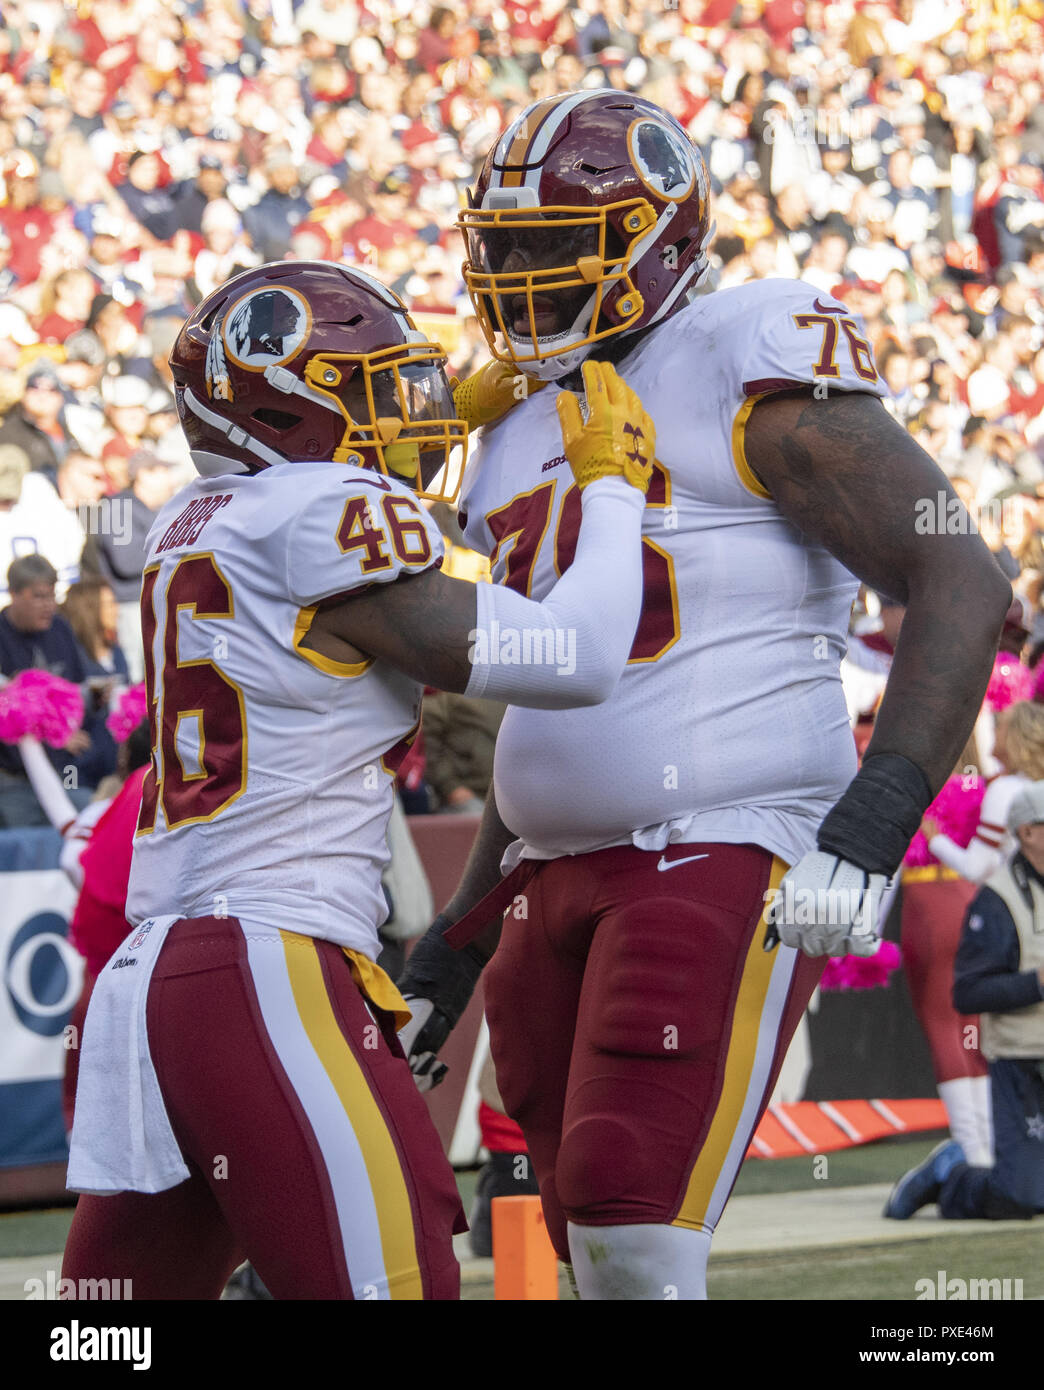 Landover, Maryland, USA. 21st Oct, 2018. Washington Redskins running back Kapri Bibbs (46) and offensive tackle Morgan Moses (76) celebrate Bibbs' first quarter touchdown against the Washington Redskins at FedEx Field in Landover, Maryland on Sunday, October 21, 2018 Credit: Ron Sachs/CNP/ZUMA Wire/Alamy Live News Stock Photo